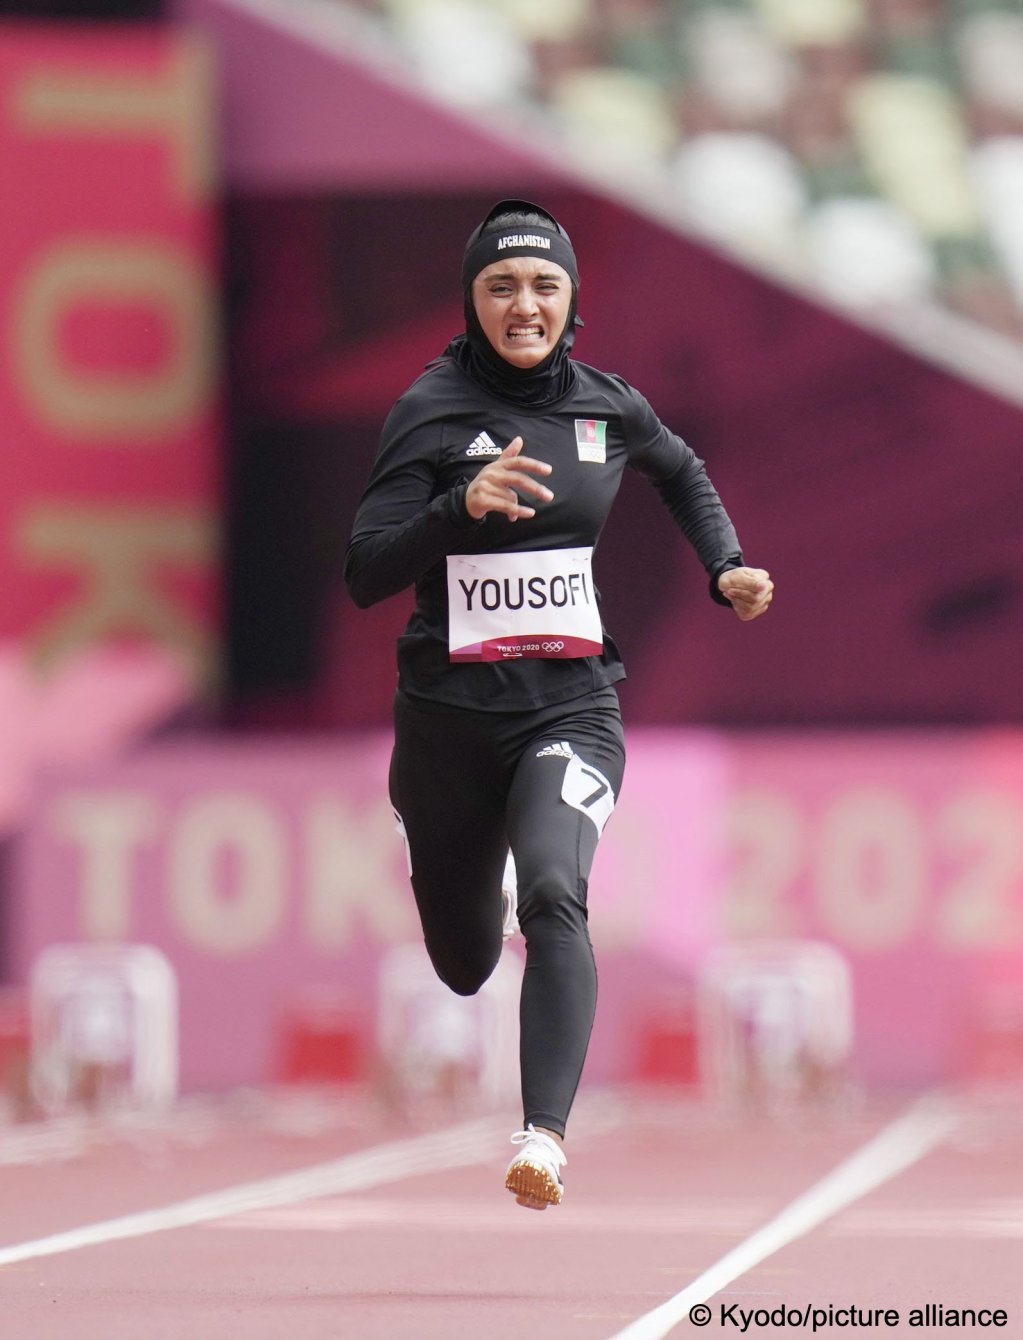 Afghan sprinter Kimia Yousofi is seen competing in the women's 100-meter preliminary round of the Tokyo Olympics on July 30, 2021 | Photo: picture alliance / Kyodo